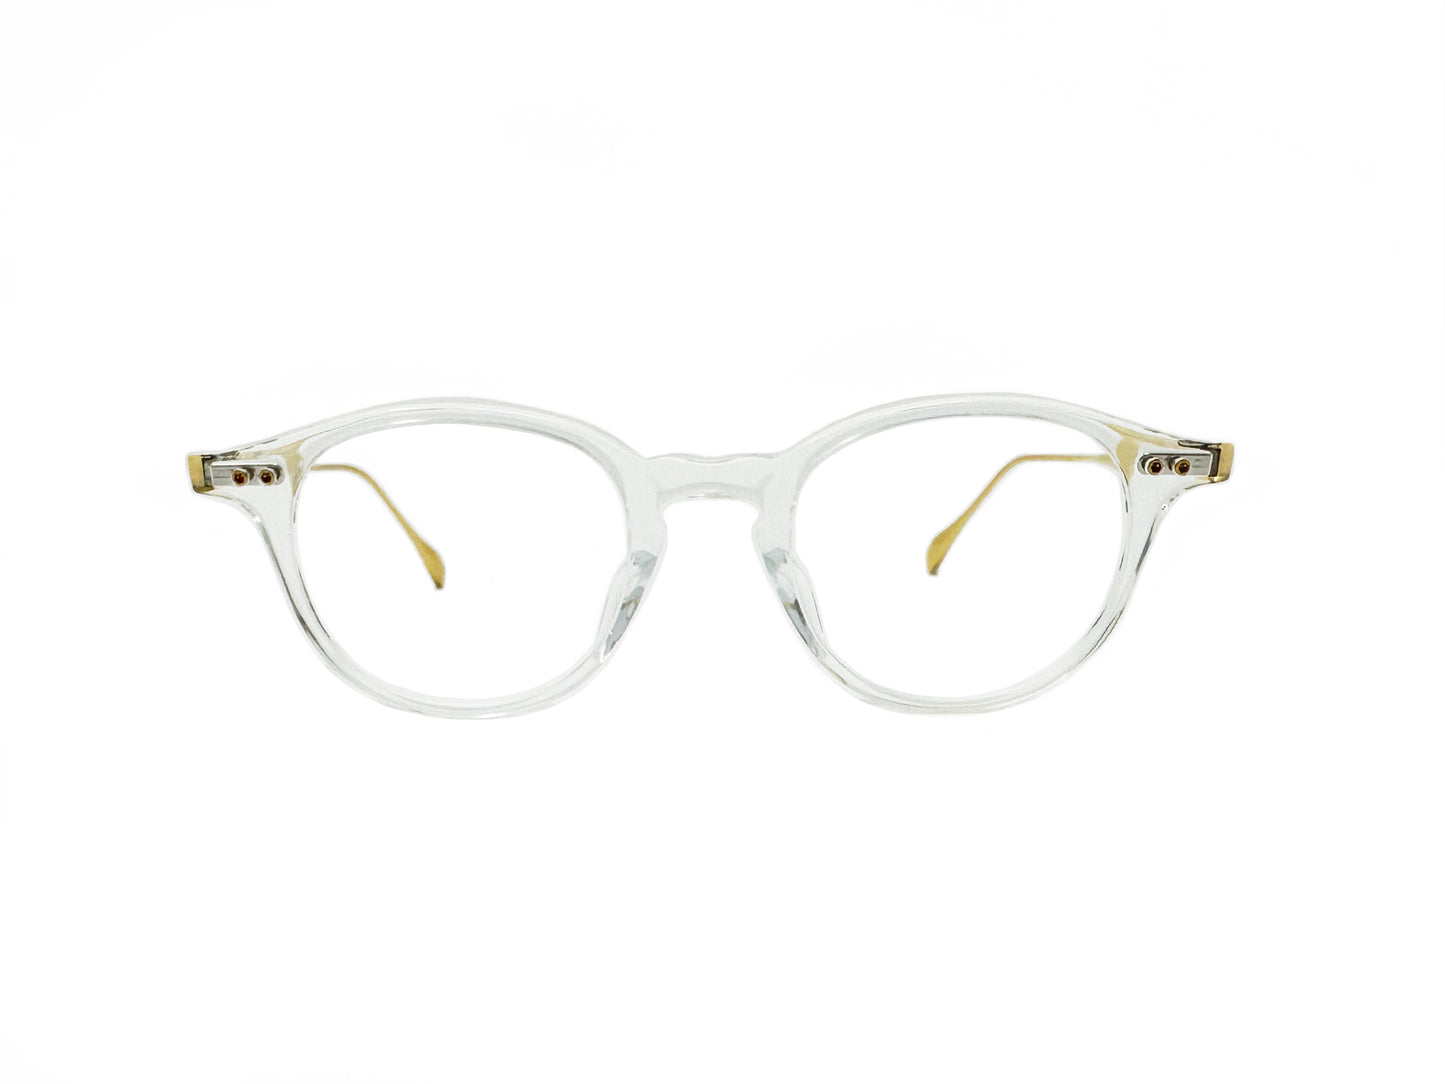 Dita round acetate optical frame with keyhole bridge and gold metal temples. Model: (Ash+). Color: CLR-GLD - Transparent acetate front with gold metal temples. Front view. 